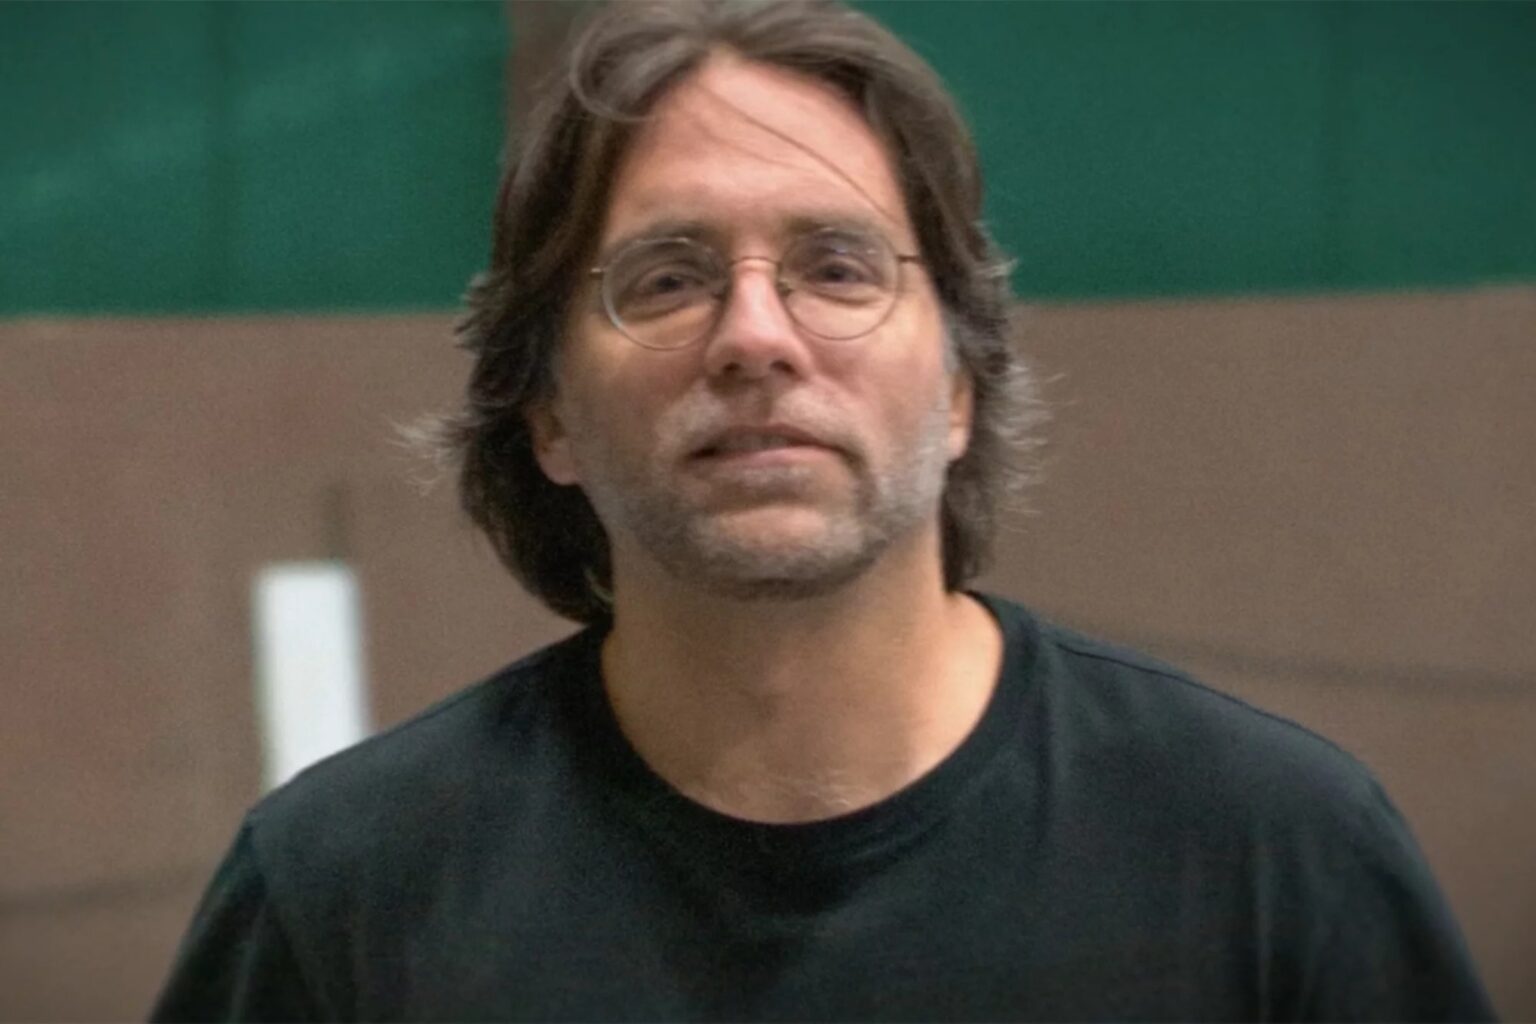 Keith Raniere was the main puppeteer of NXIVM, but he didn't work alone. Here's a look into NXIVM leadership and the abuse amongst them.